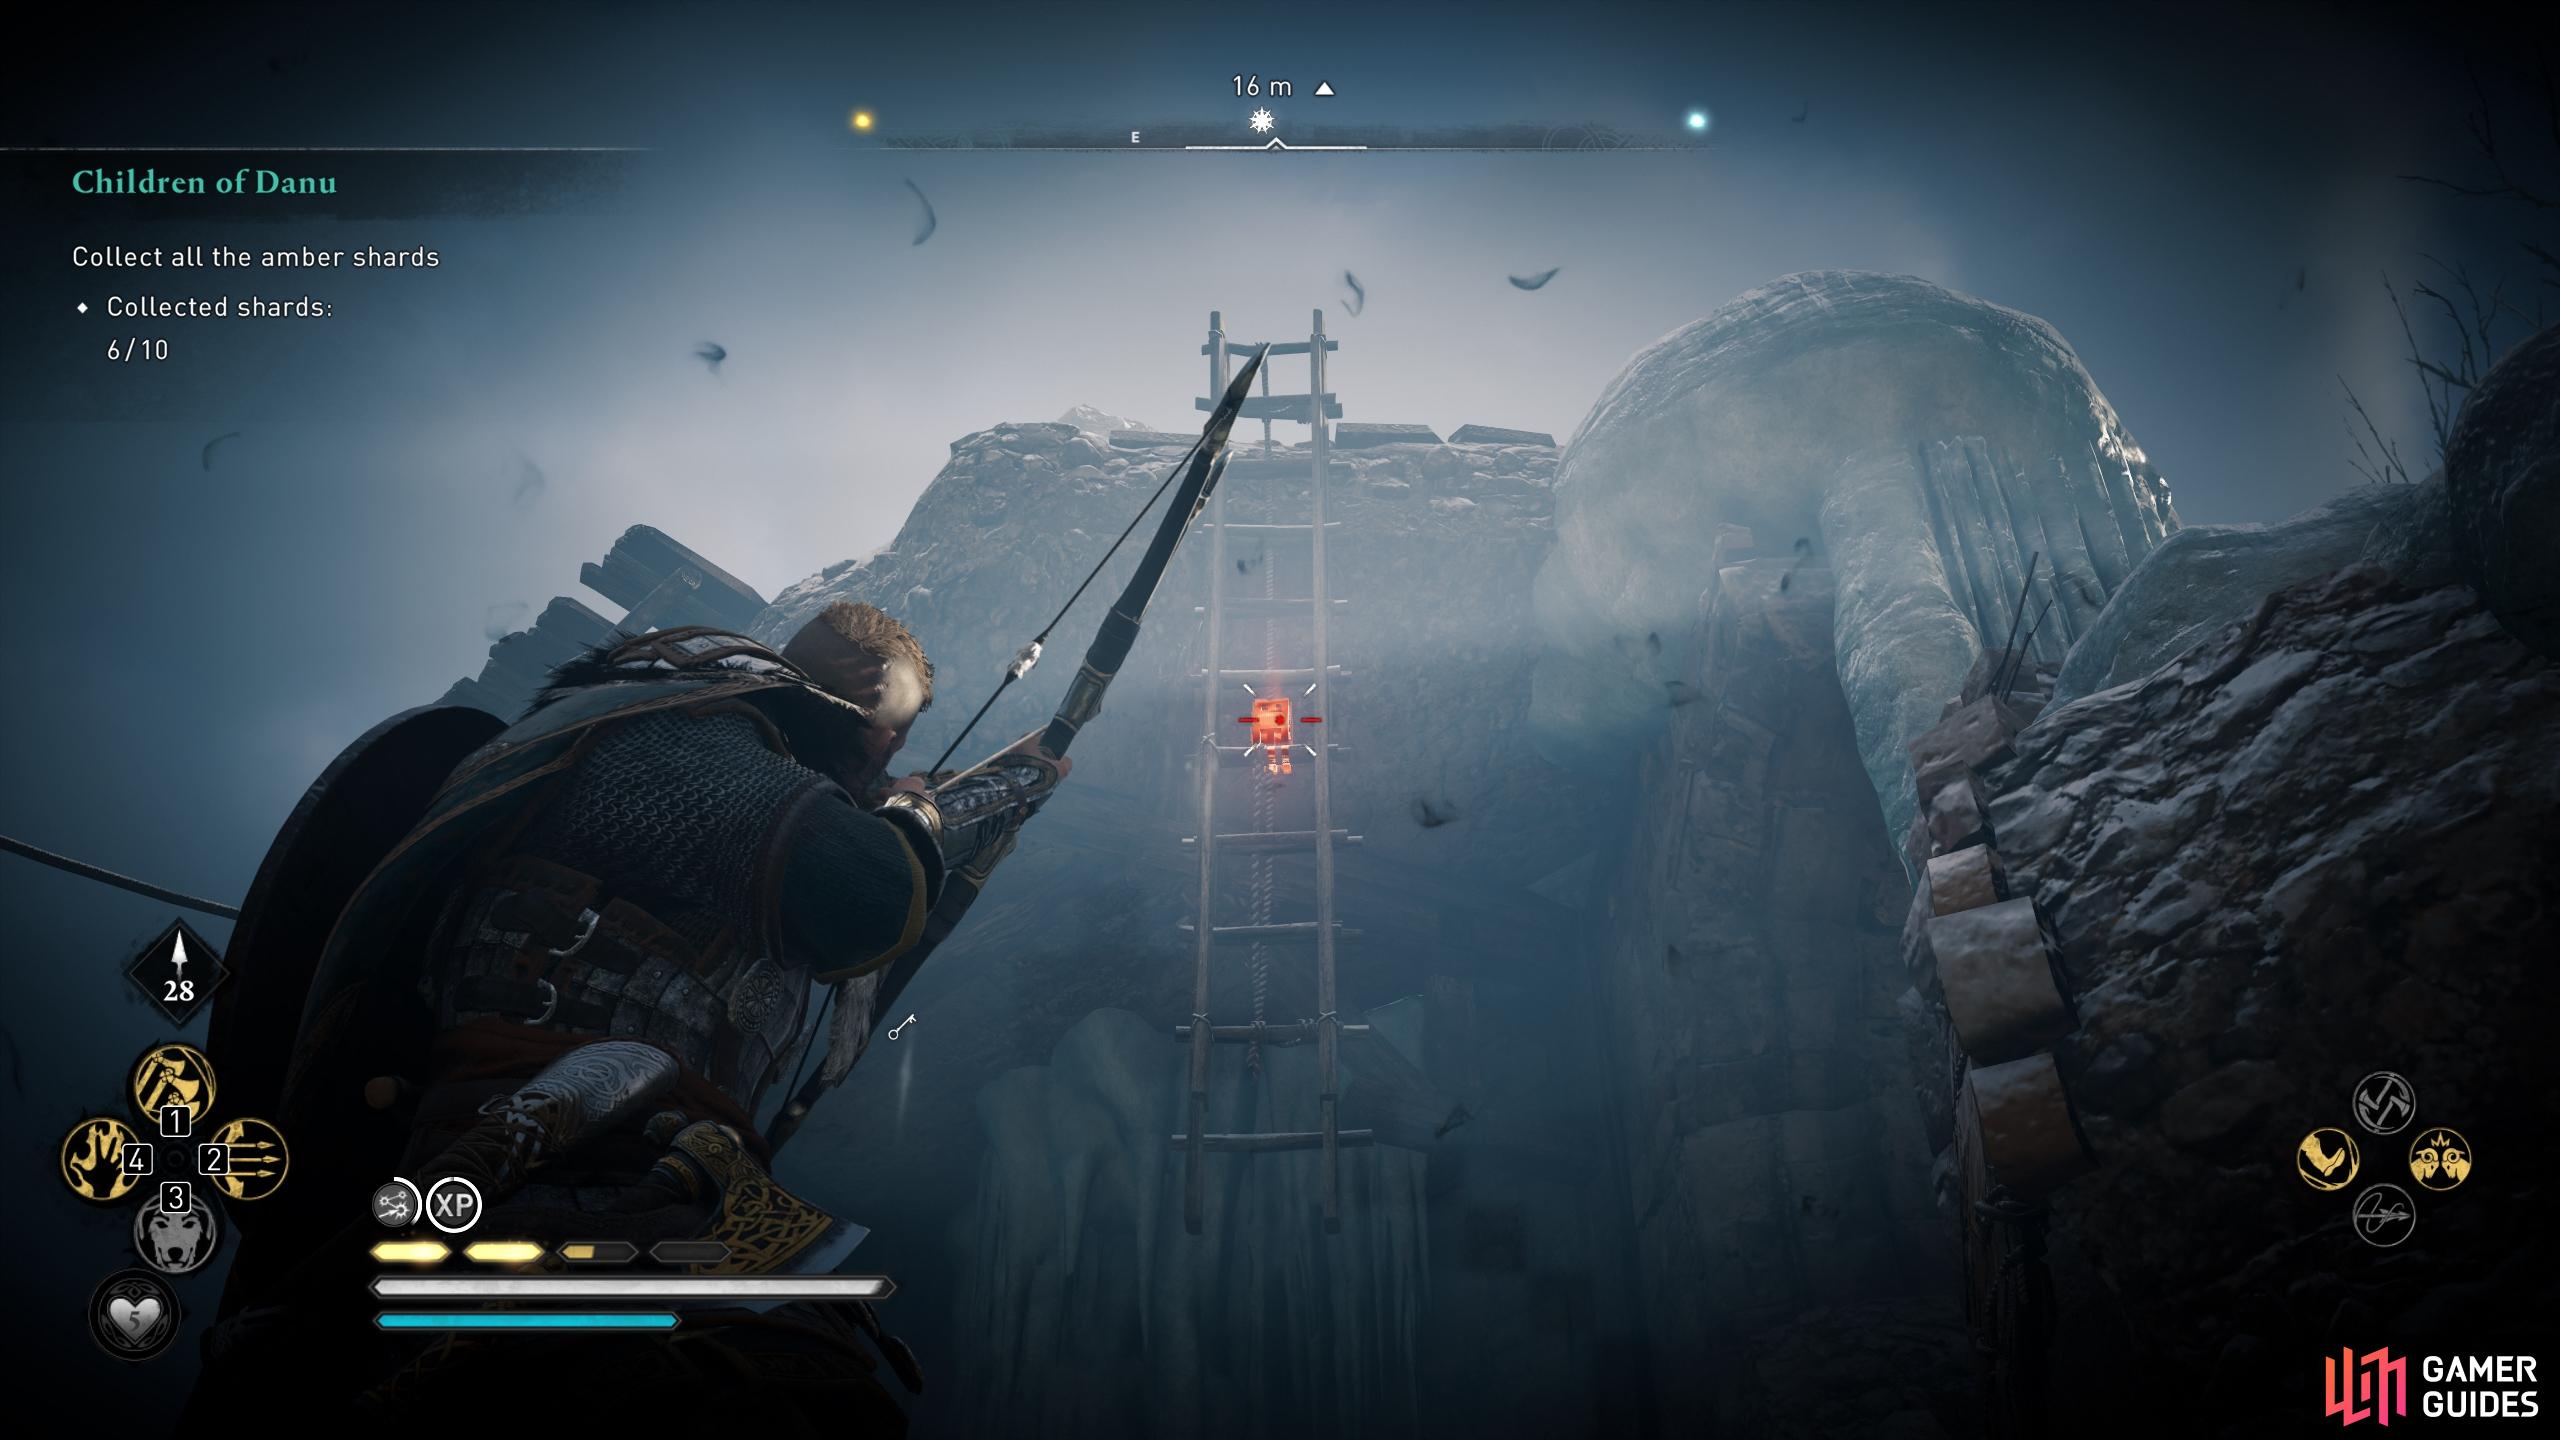 Shoot the link on the ladder to lower it. You can then climb to the symbol at the top of the tower.